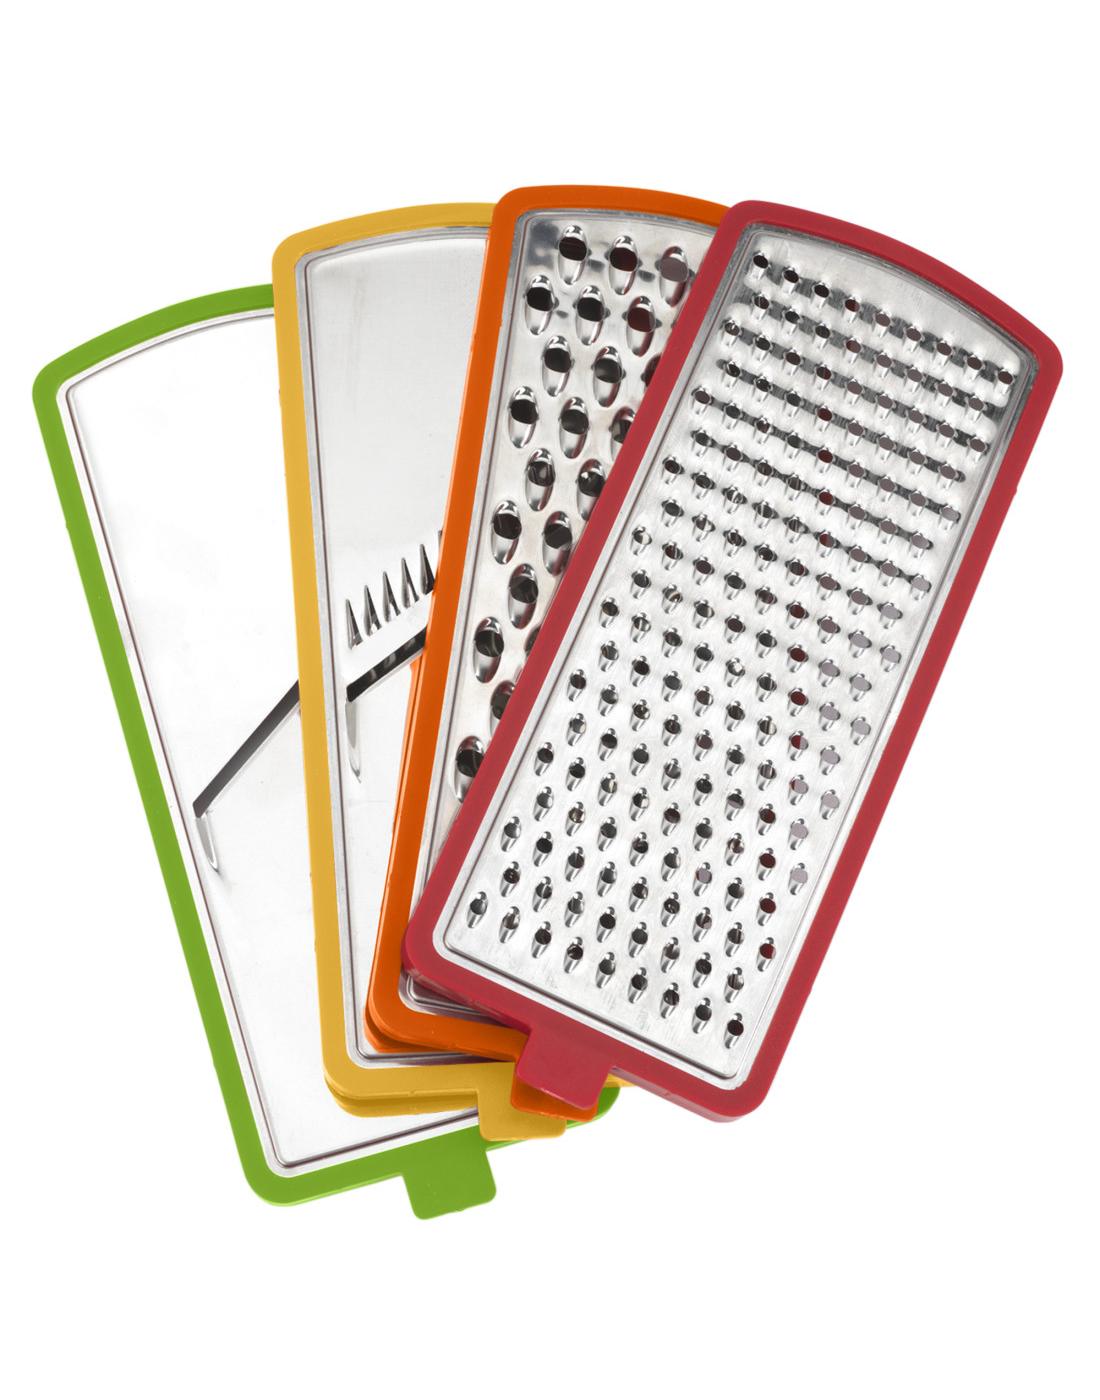 GoodCook Touch Mandolin & Grater Set; image 5 of 5